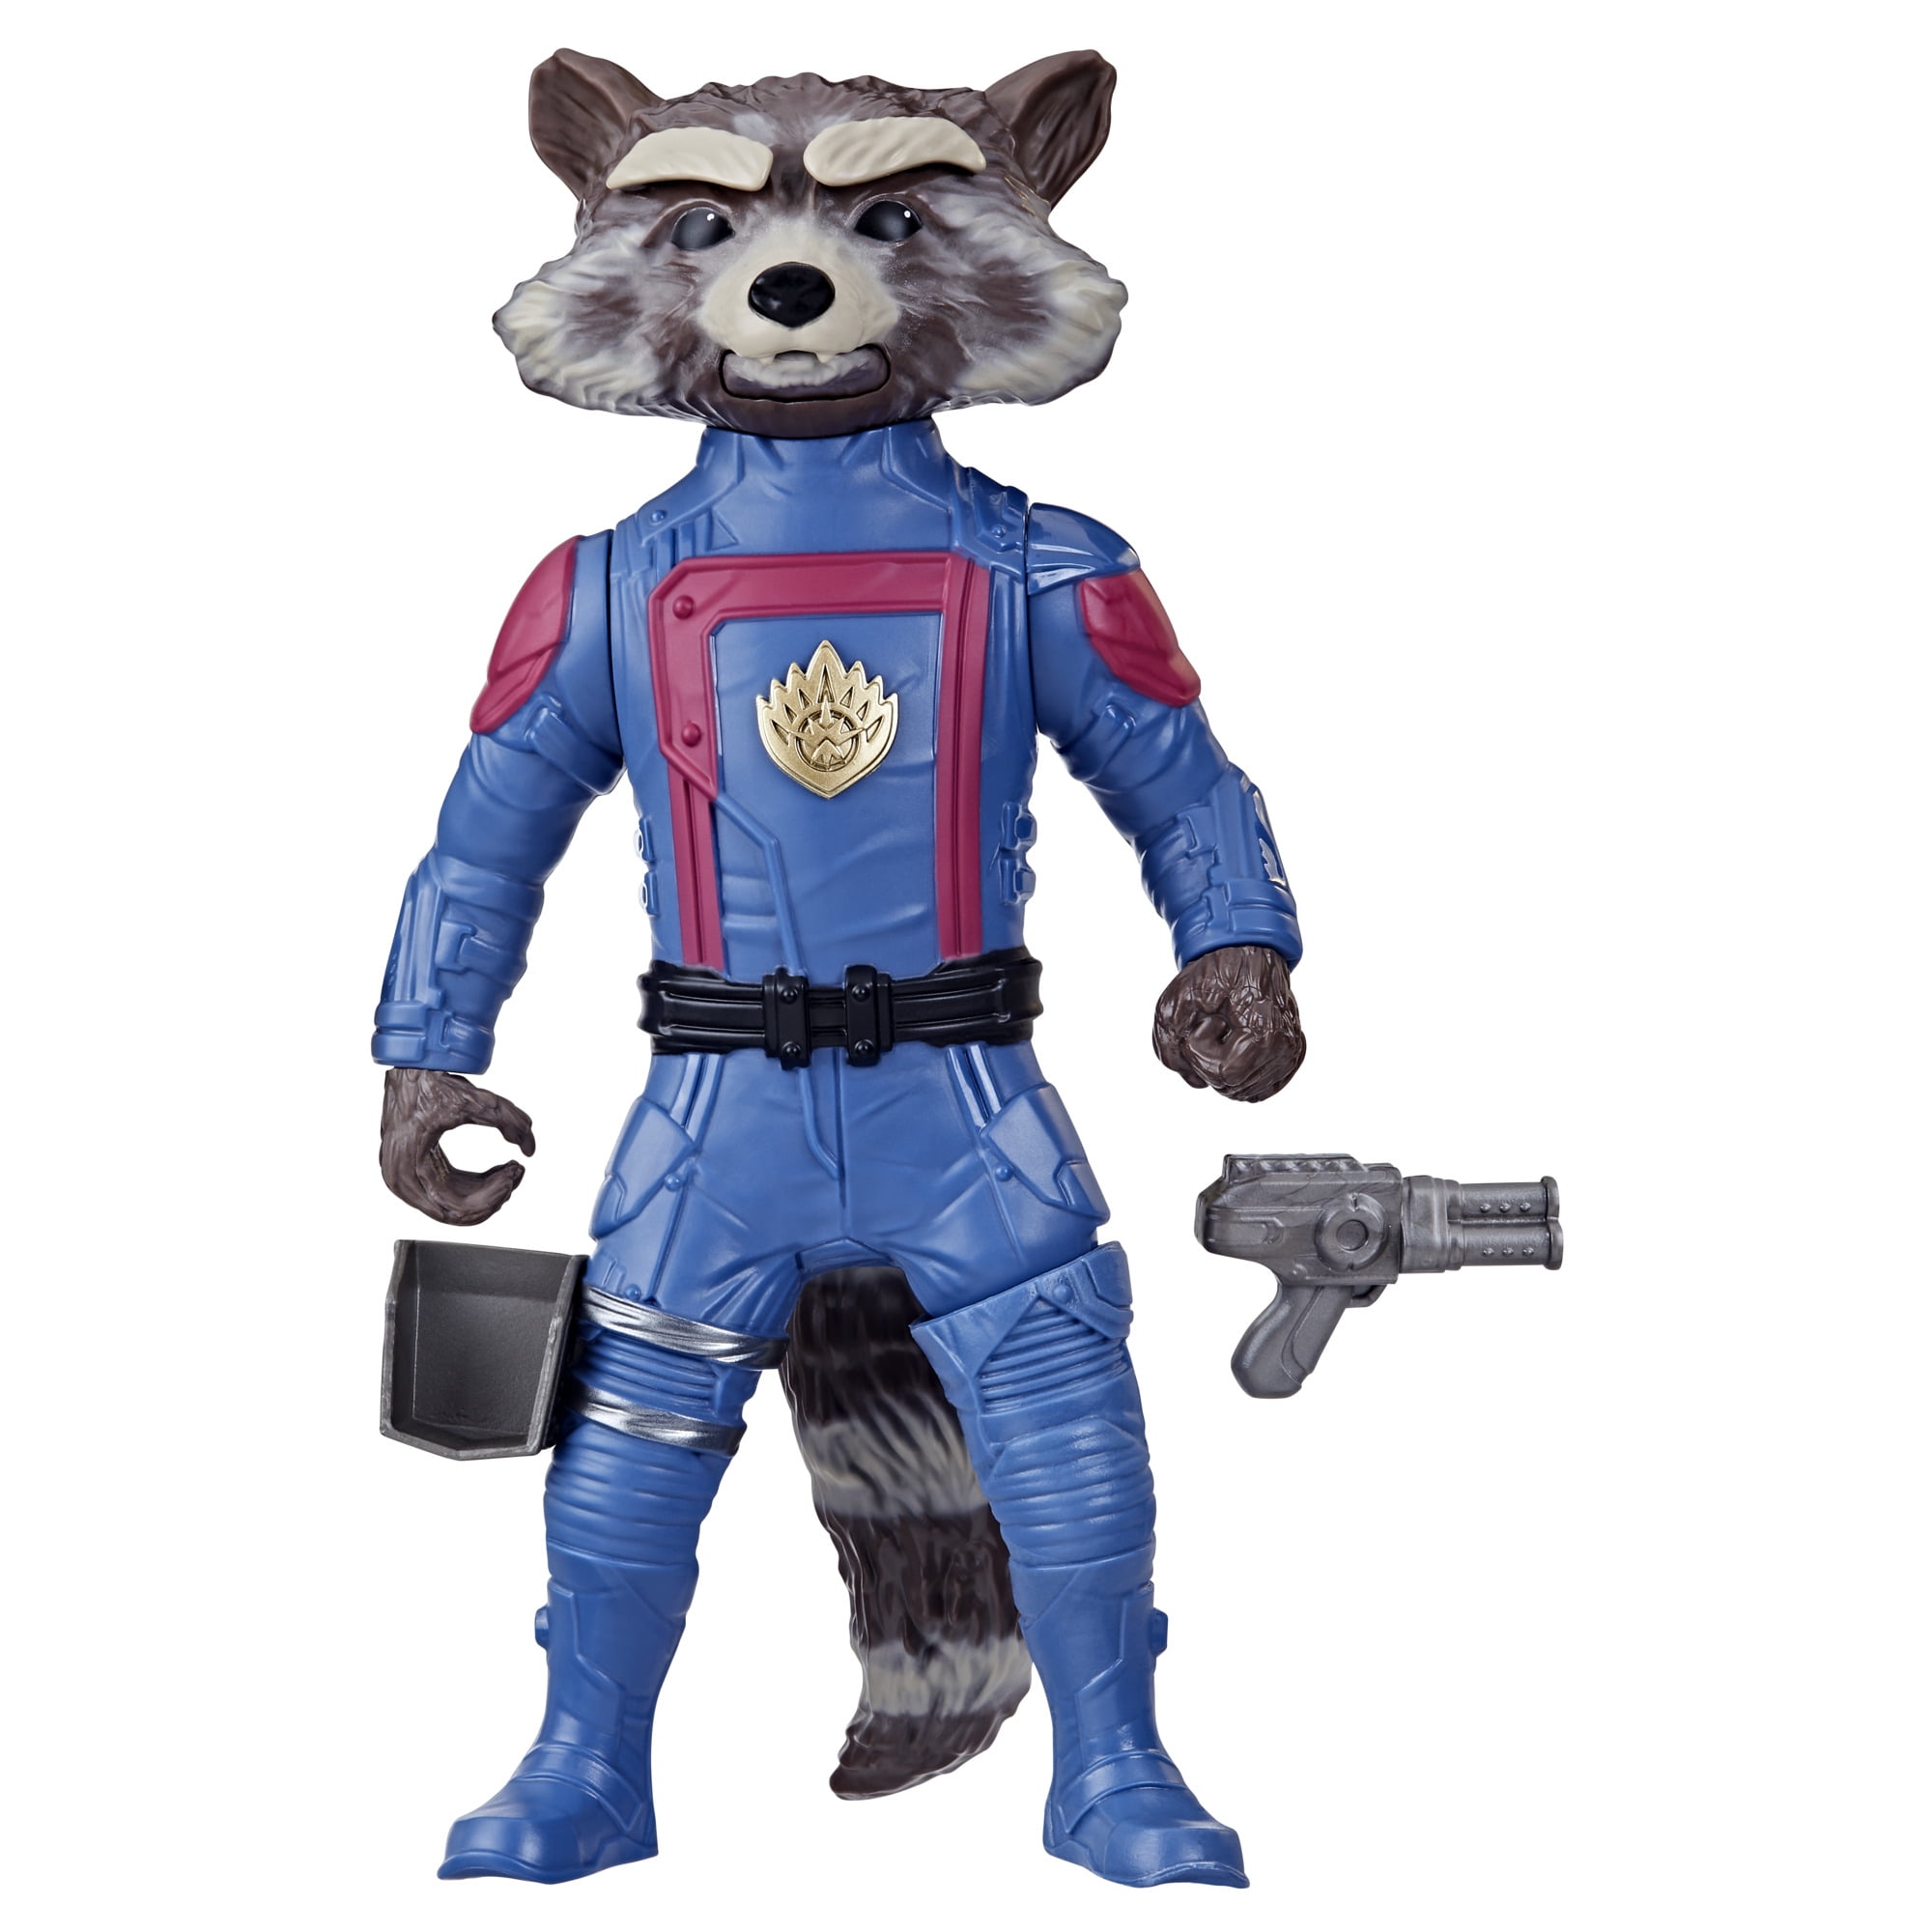 Guardians of The Galaxy 3 Outrageous Rocket Raccoon Figure